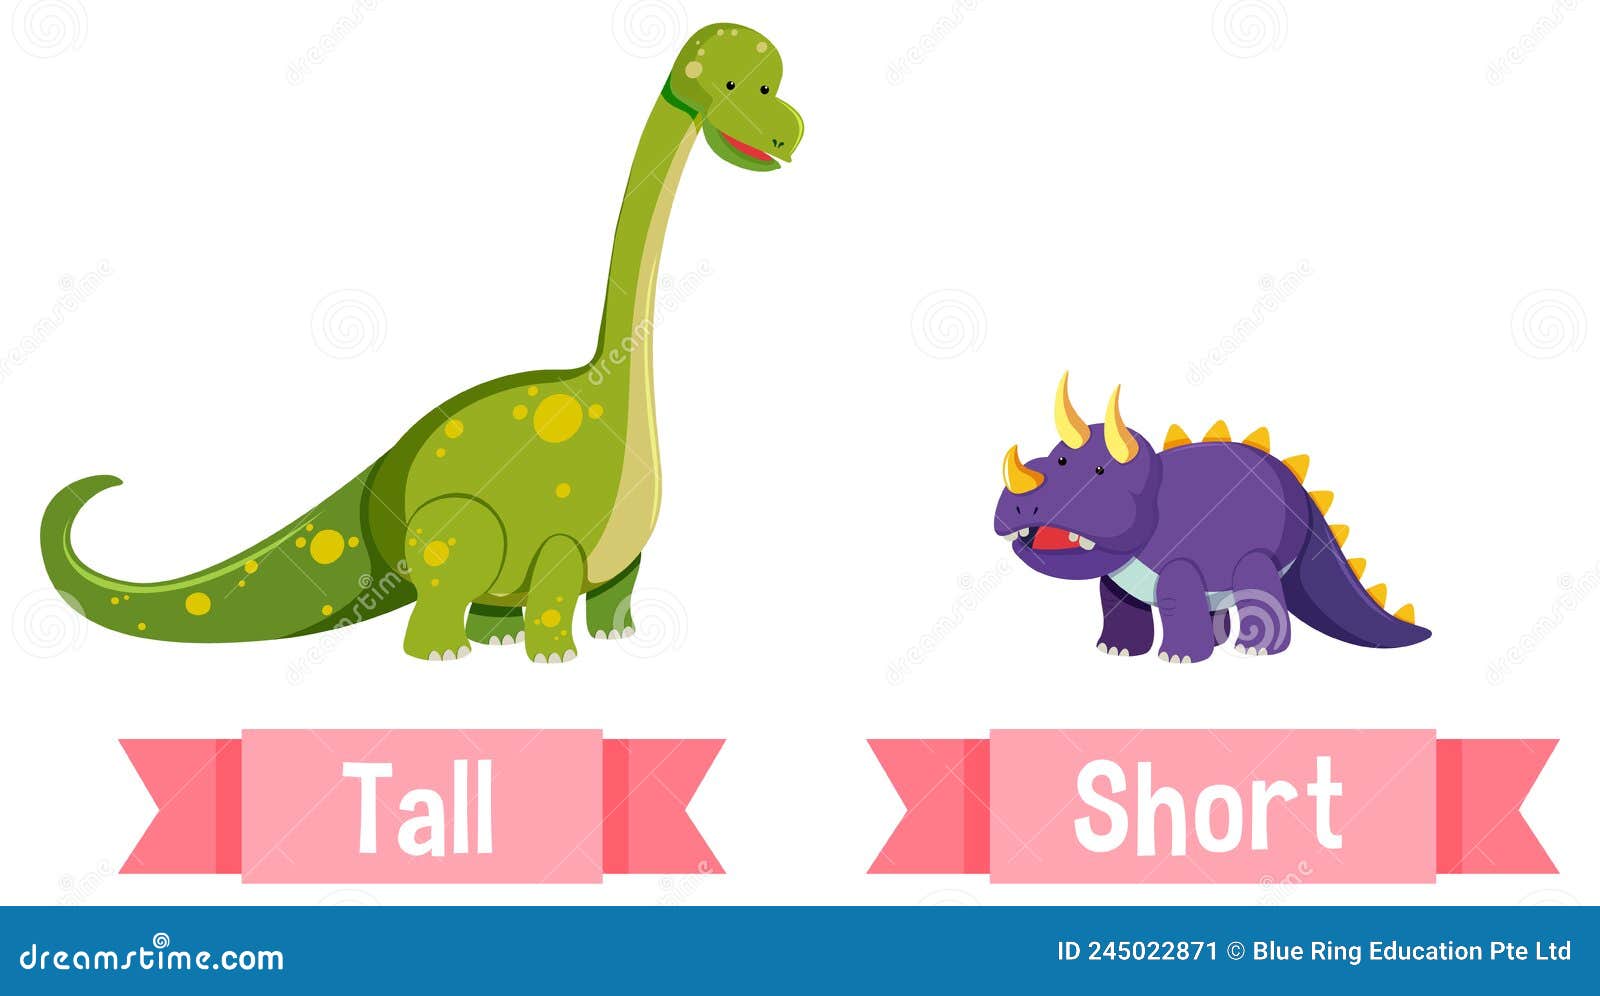 Words Tall And Short Flashcard With Cartoon Animal Characters. Opposite ...